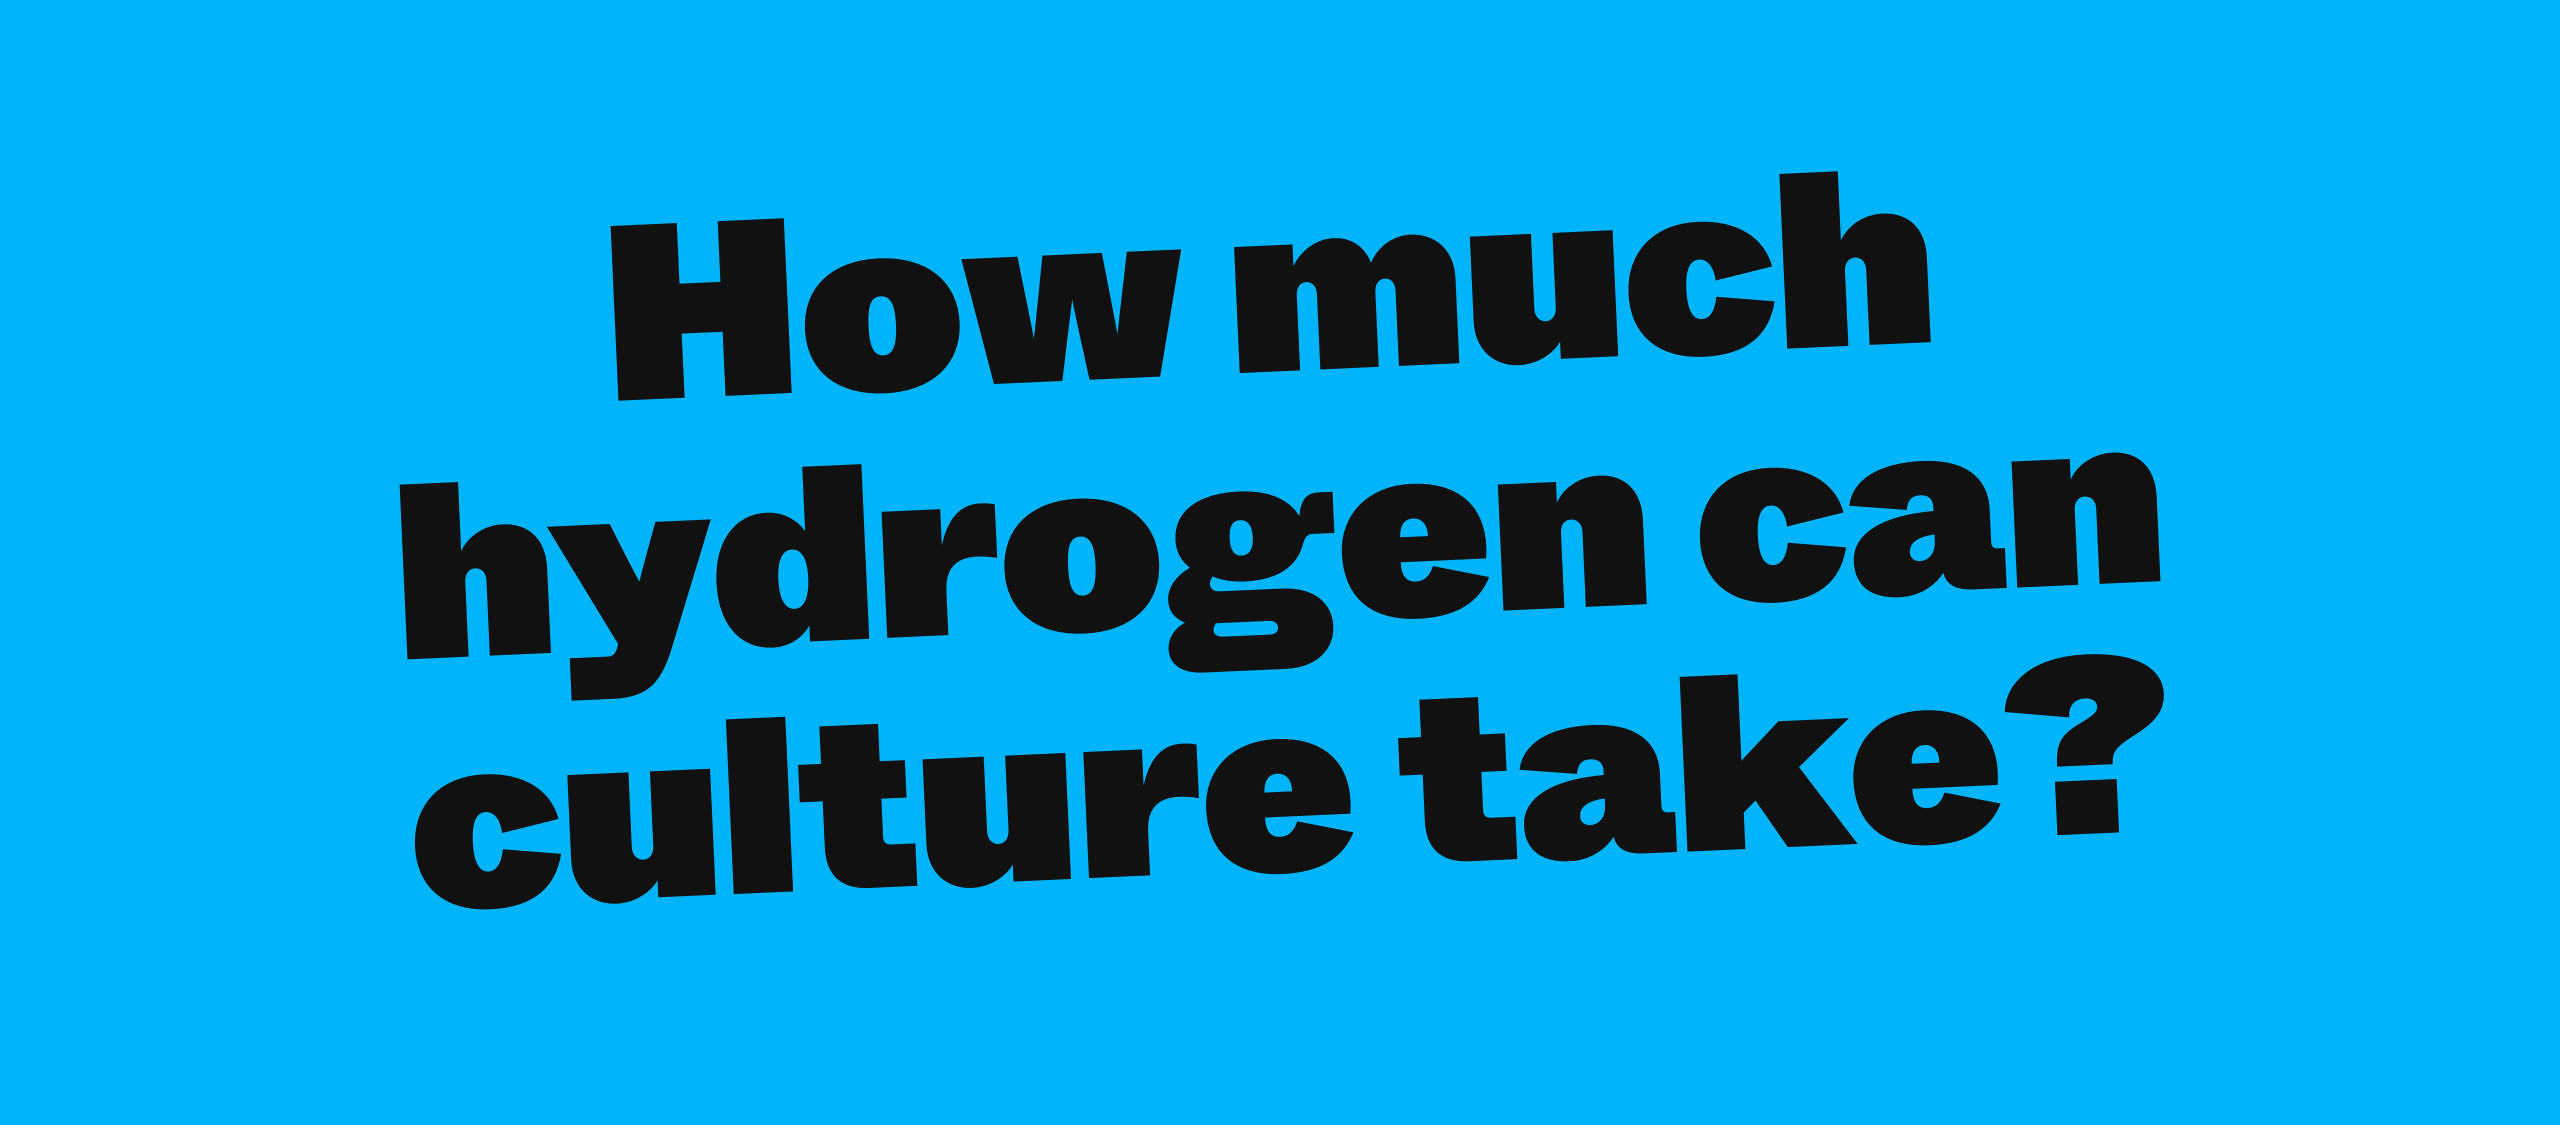 How much hydrogen can culture take?